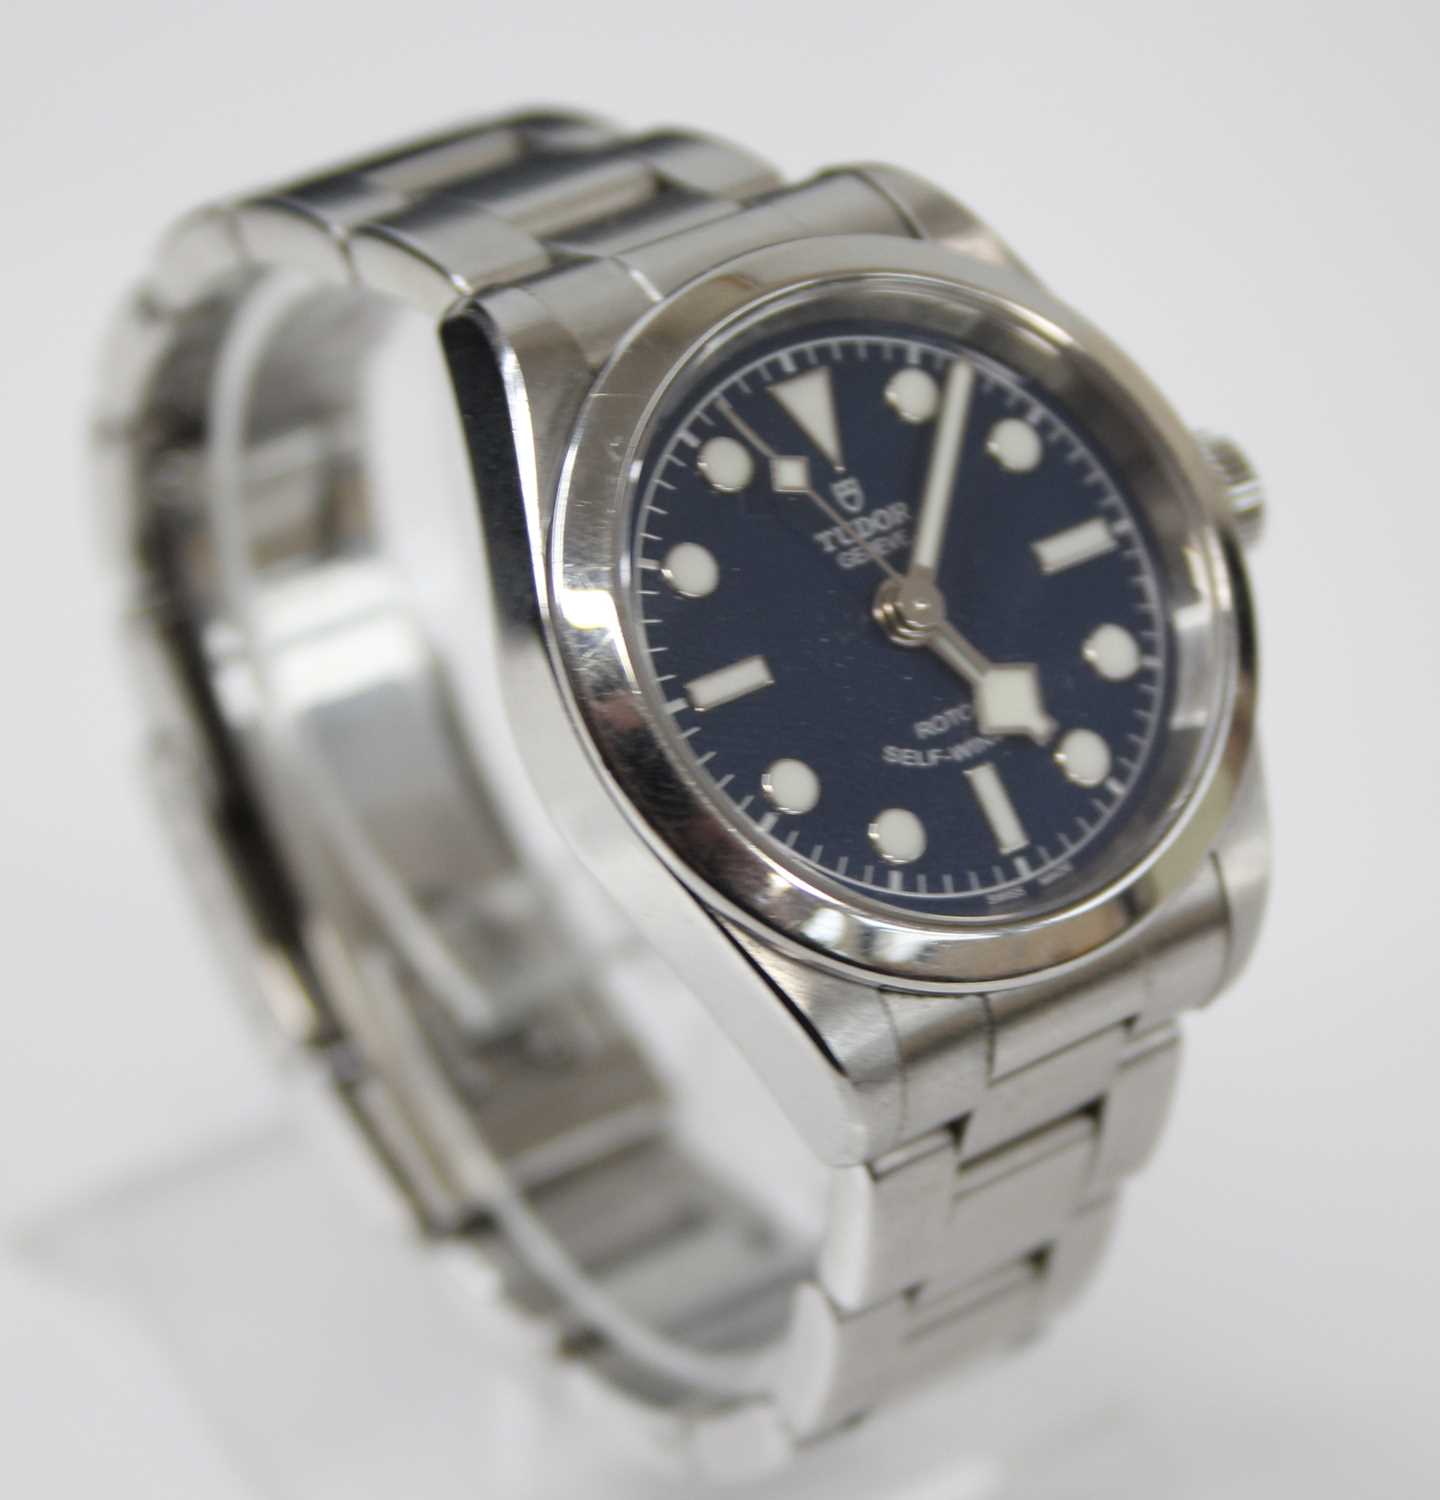 A lady's Tudor Black Bay 31 stainless steel bracelet watch, model No. 79580, serial No. 1757867, - Image 7 of 9